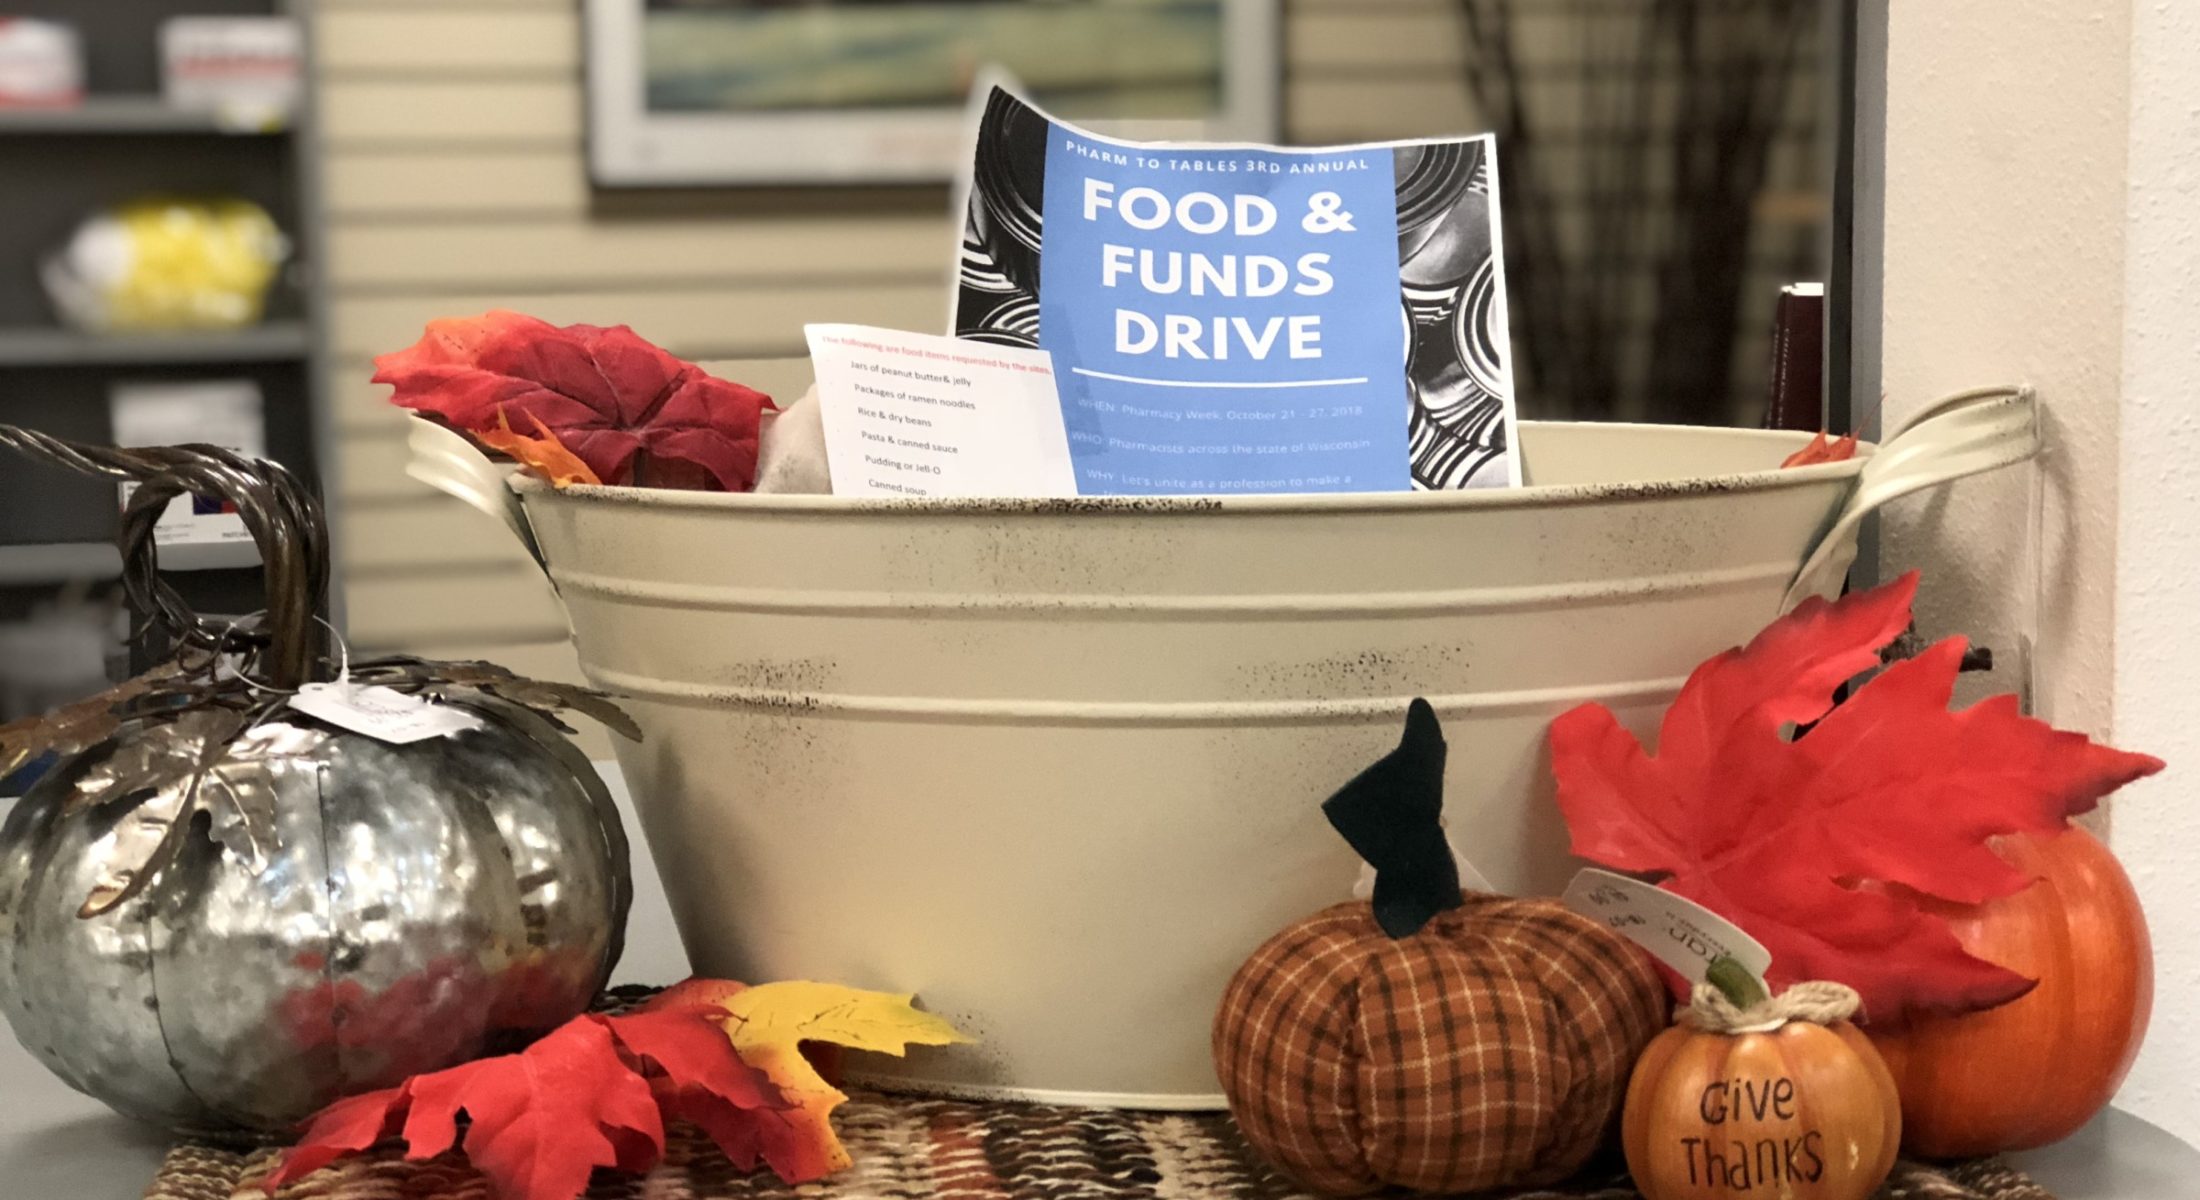 Food & Funds Drive at Our Stores